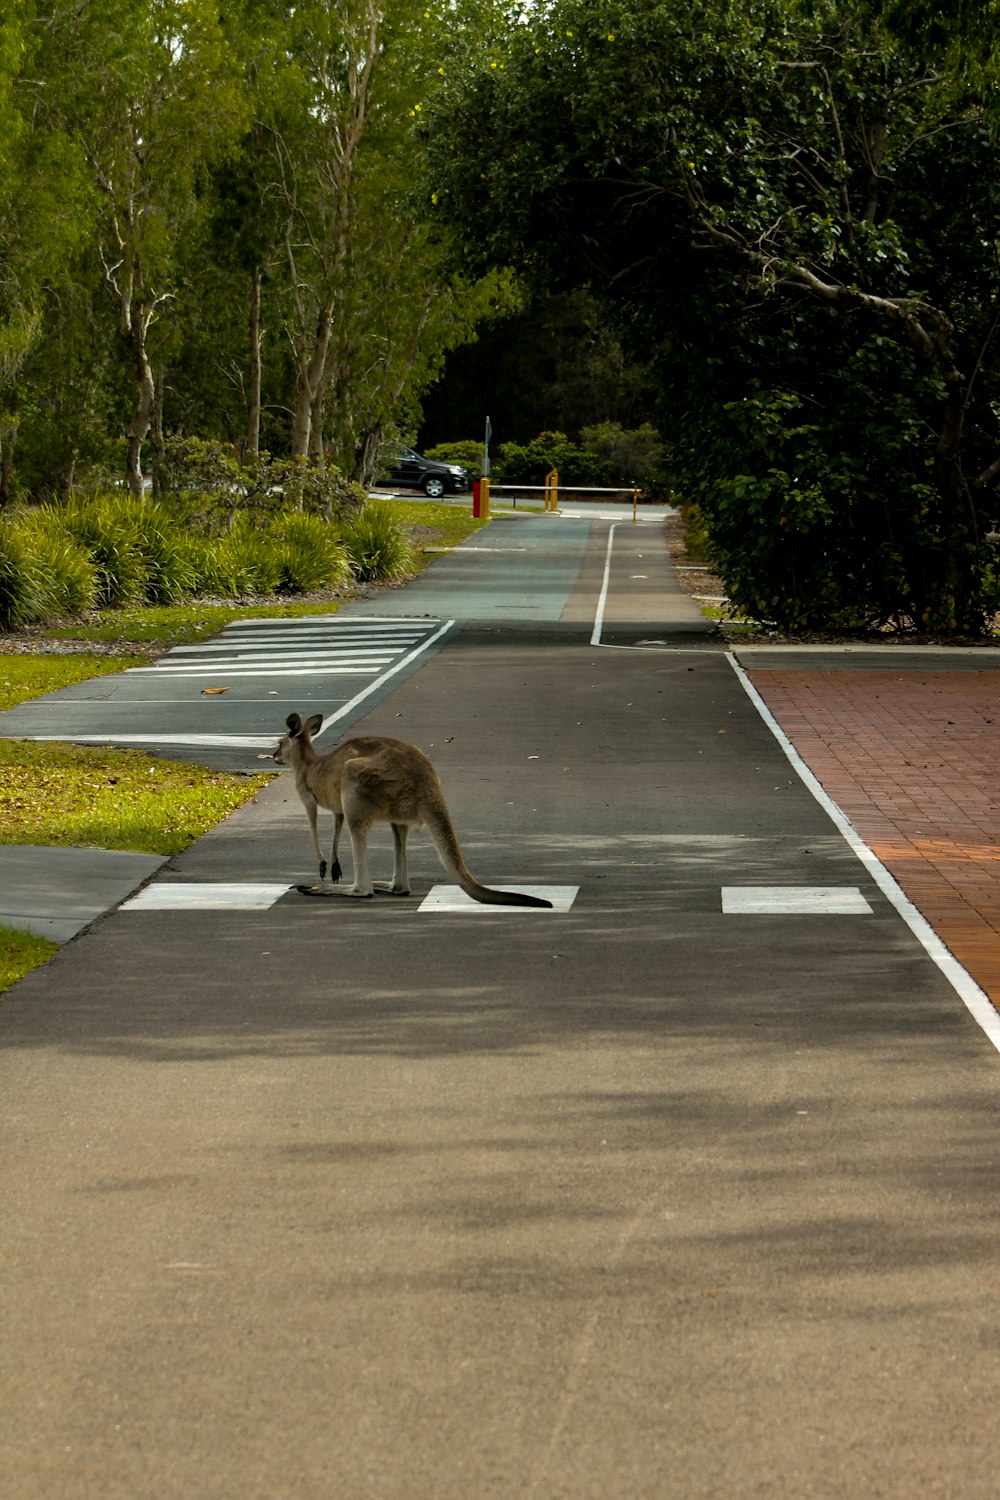 a kangaroo standing in the middle of a street